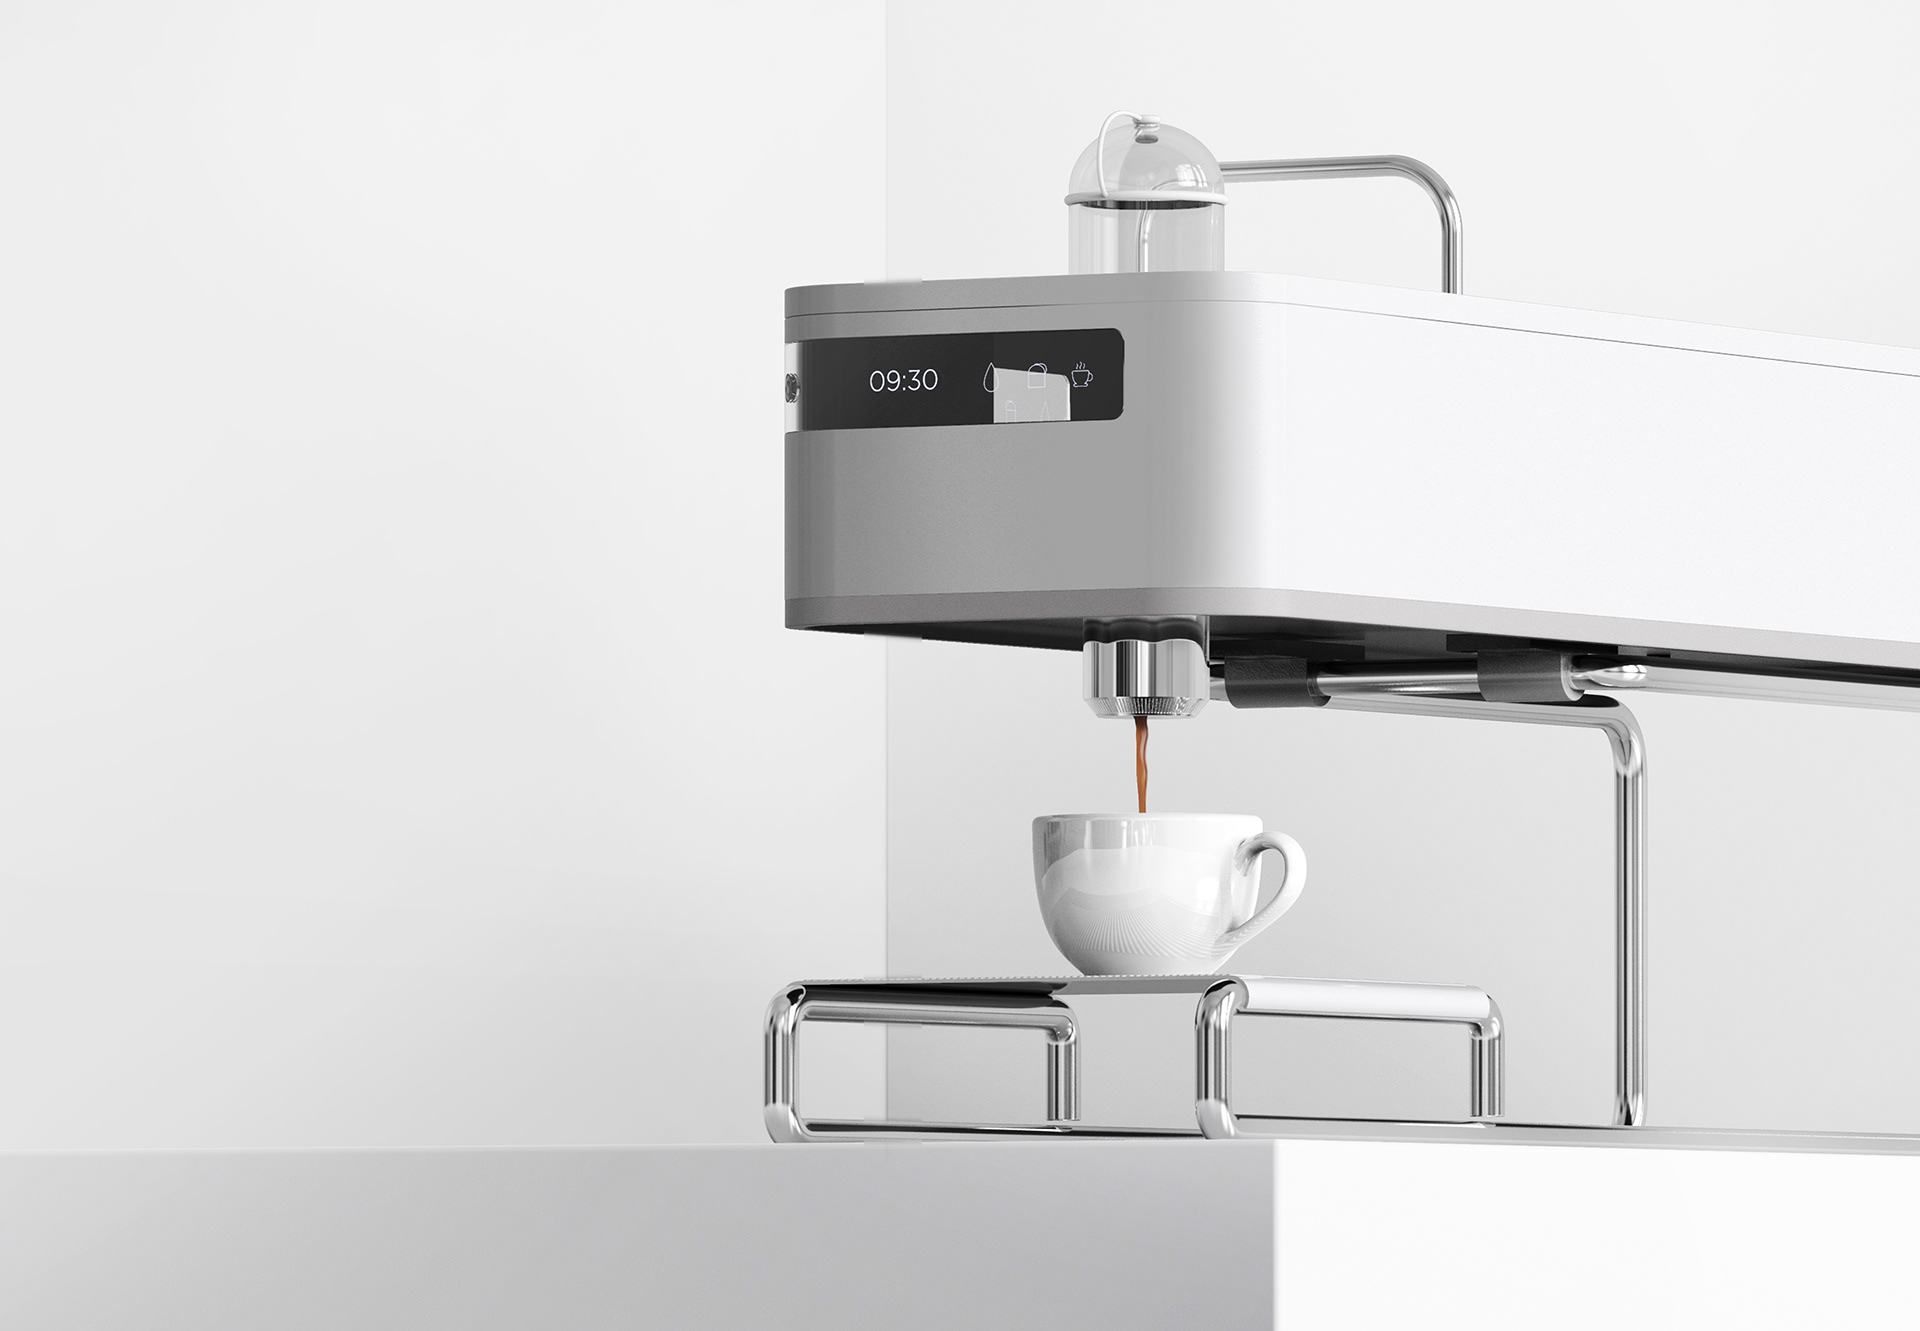 Designing your own capsule expresso on the go - Industrial Design